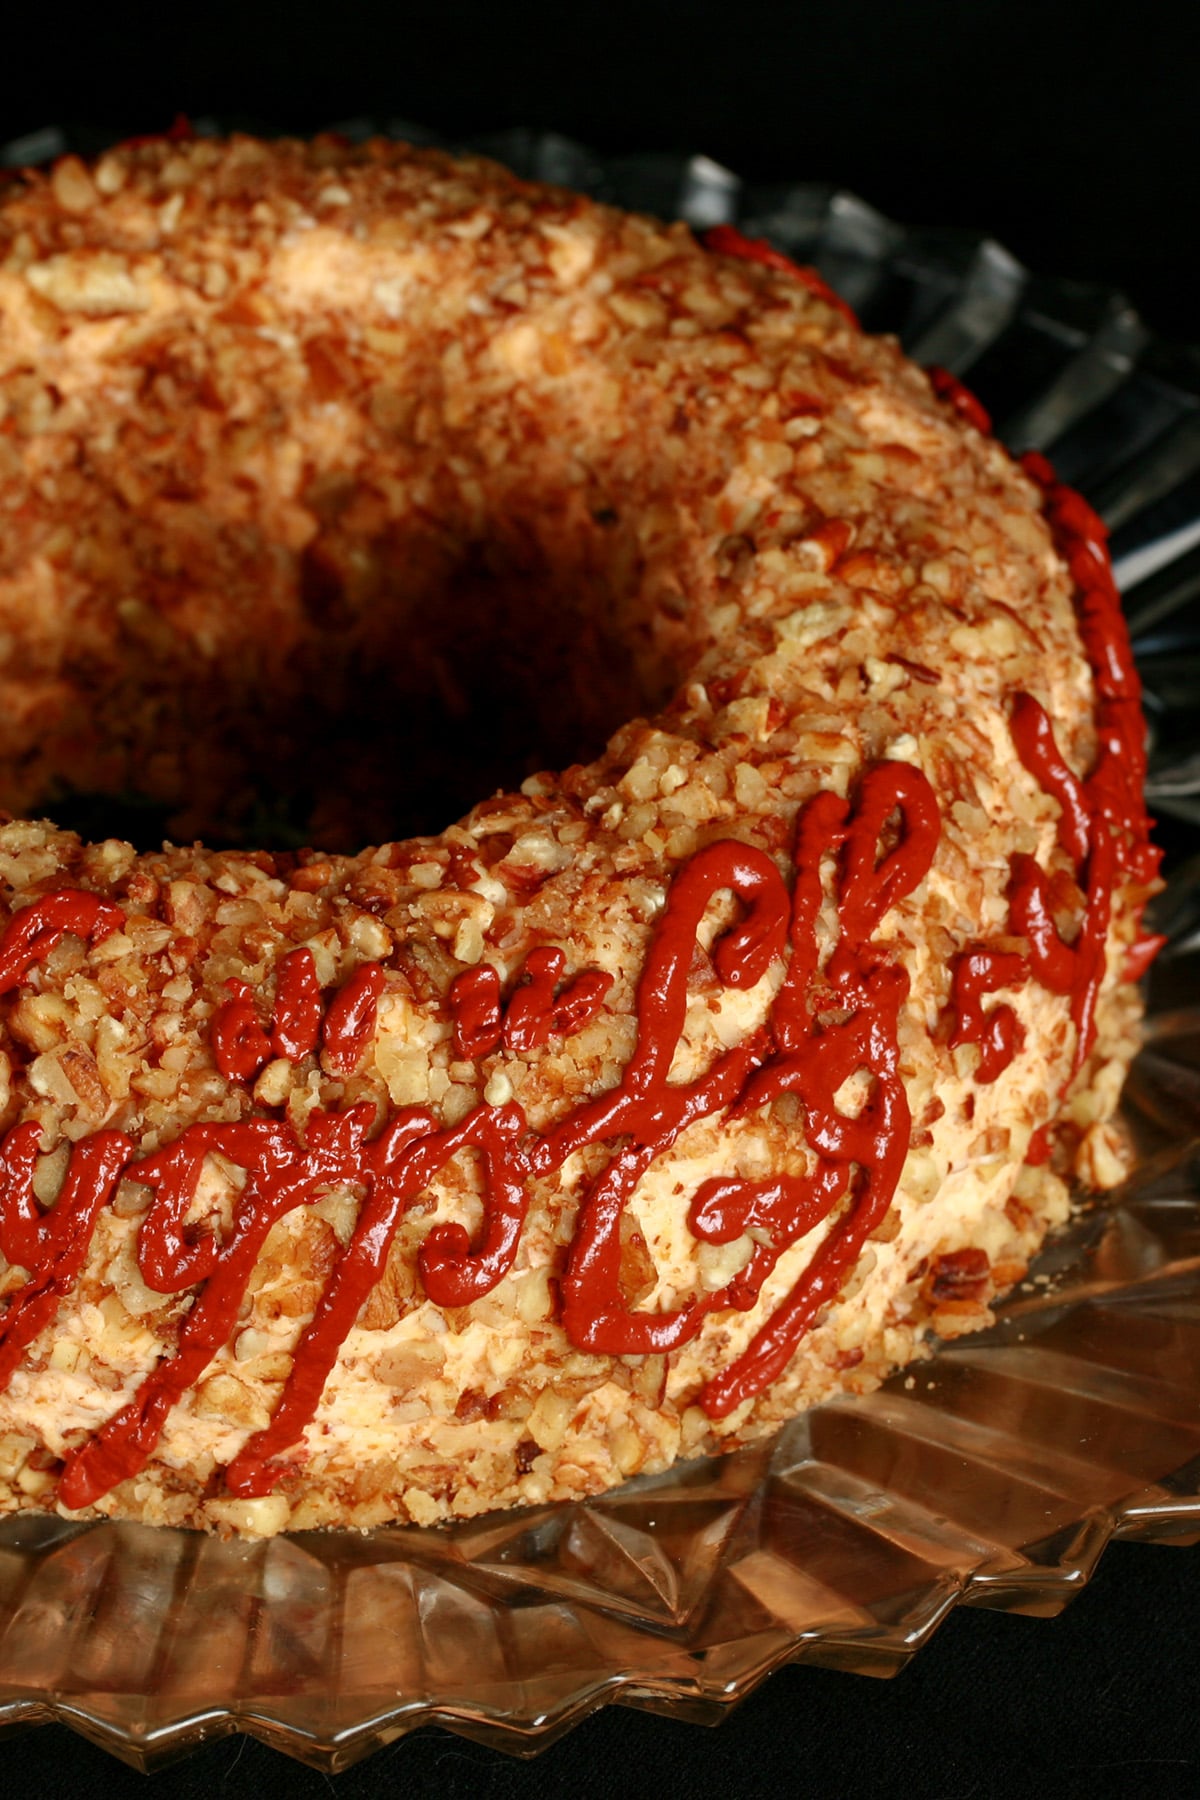 A large cheese ring, coated in nuts.  Tolkien's black speech One Ring inscription has been piped on the side, in deep red sun dried tomato paste.